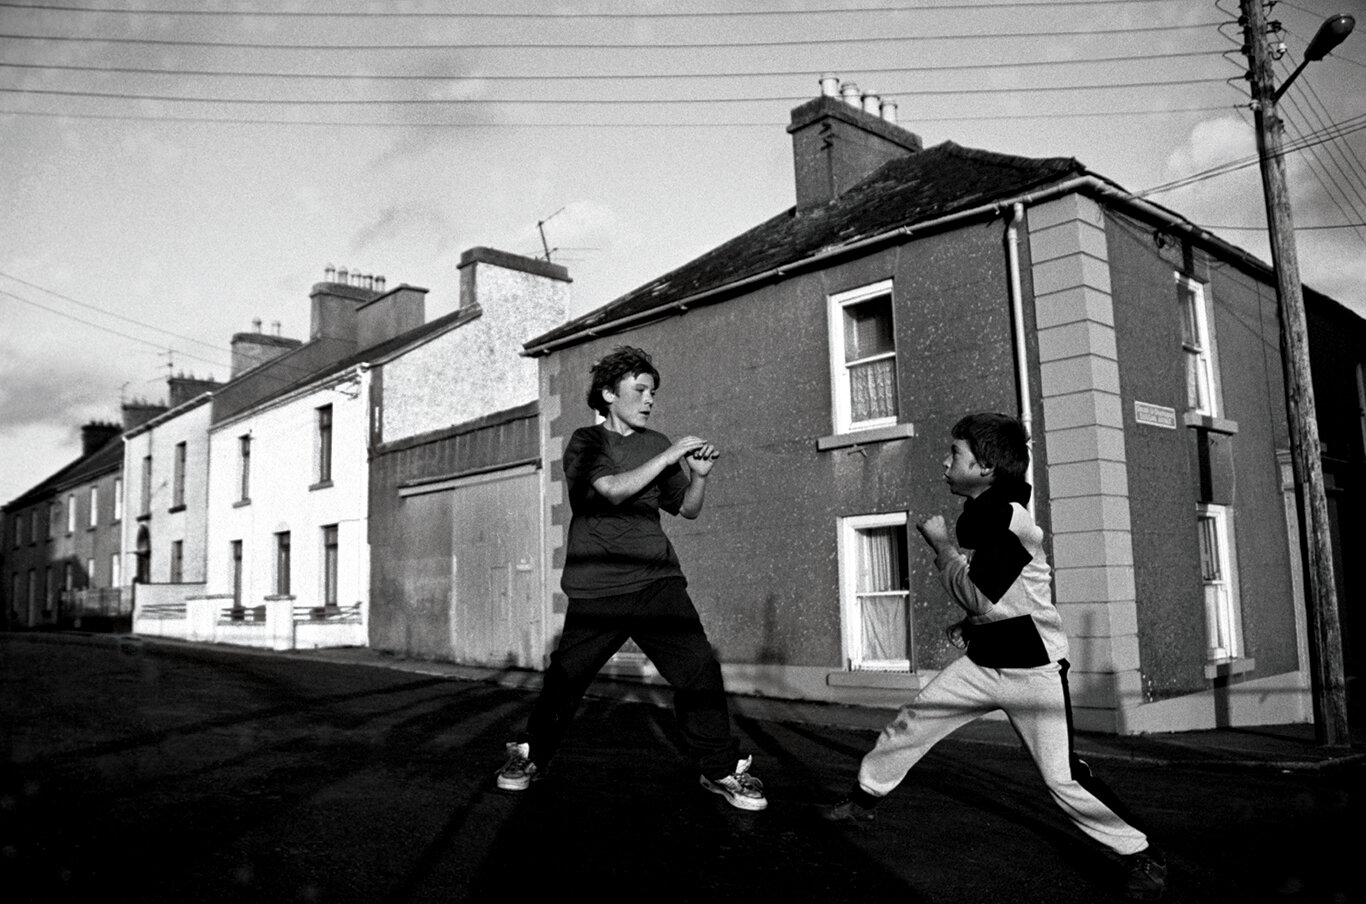  “Street Fighting” Settling differences on a street corner in Ballinasloe, County Galway, Ireland. 1990s 